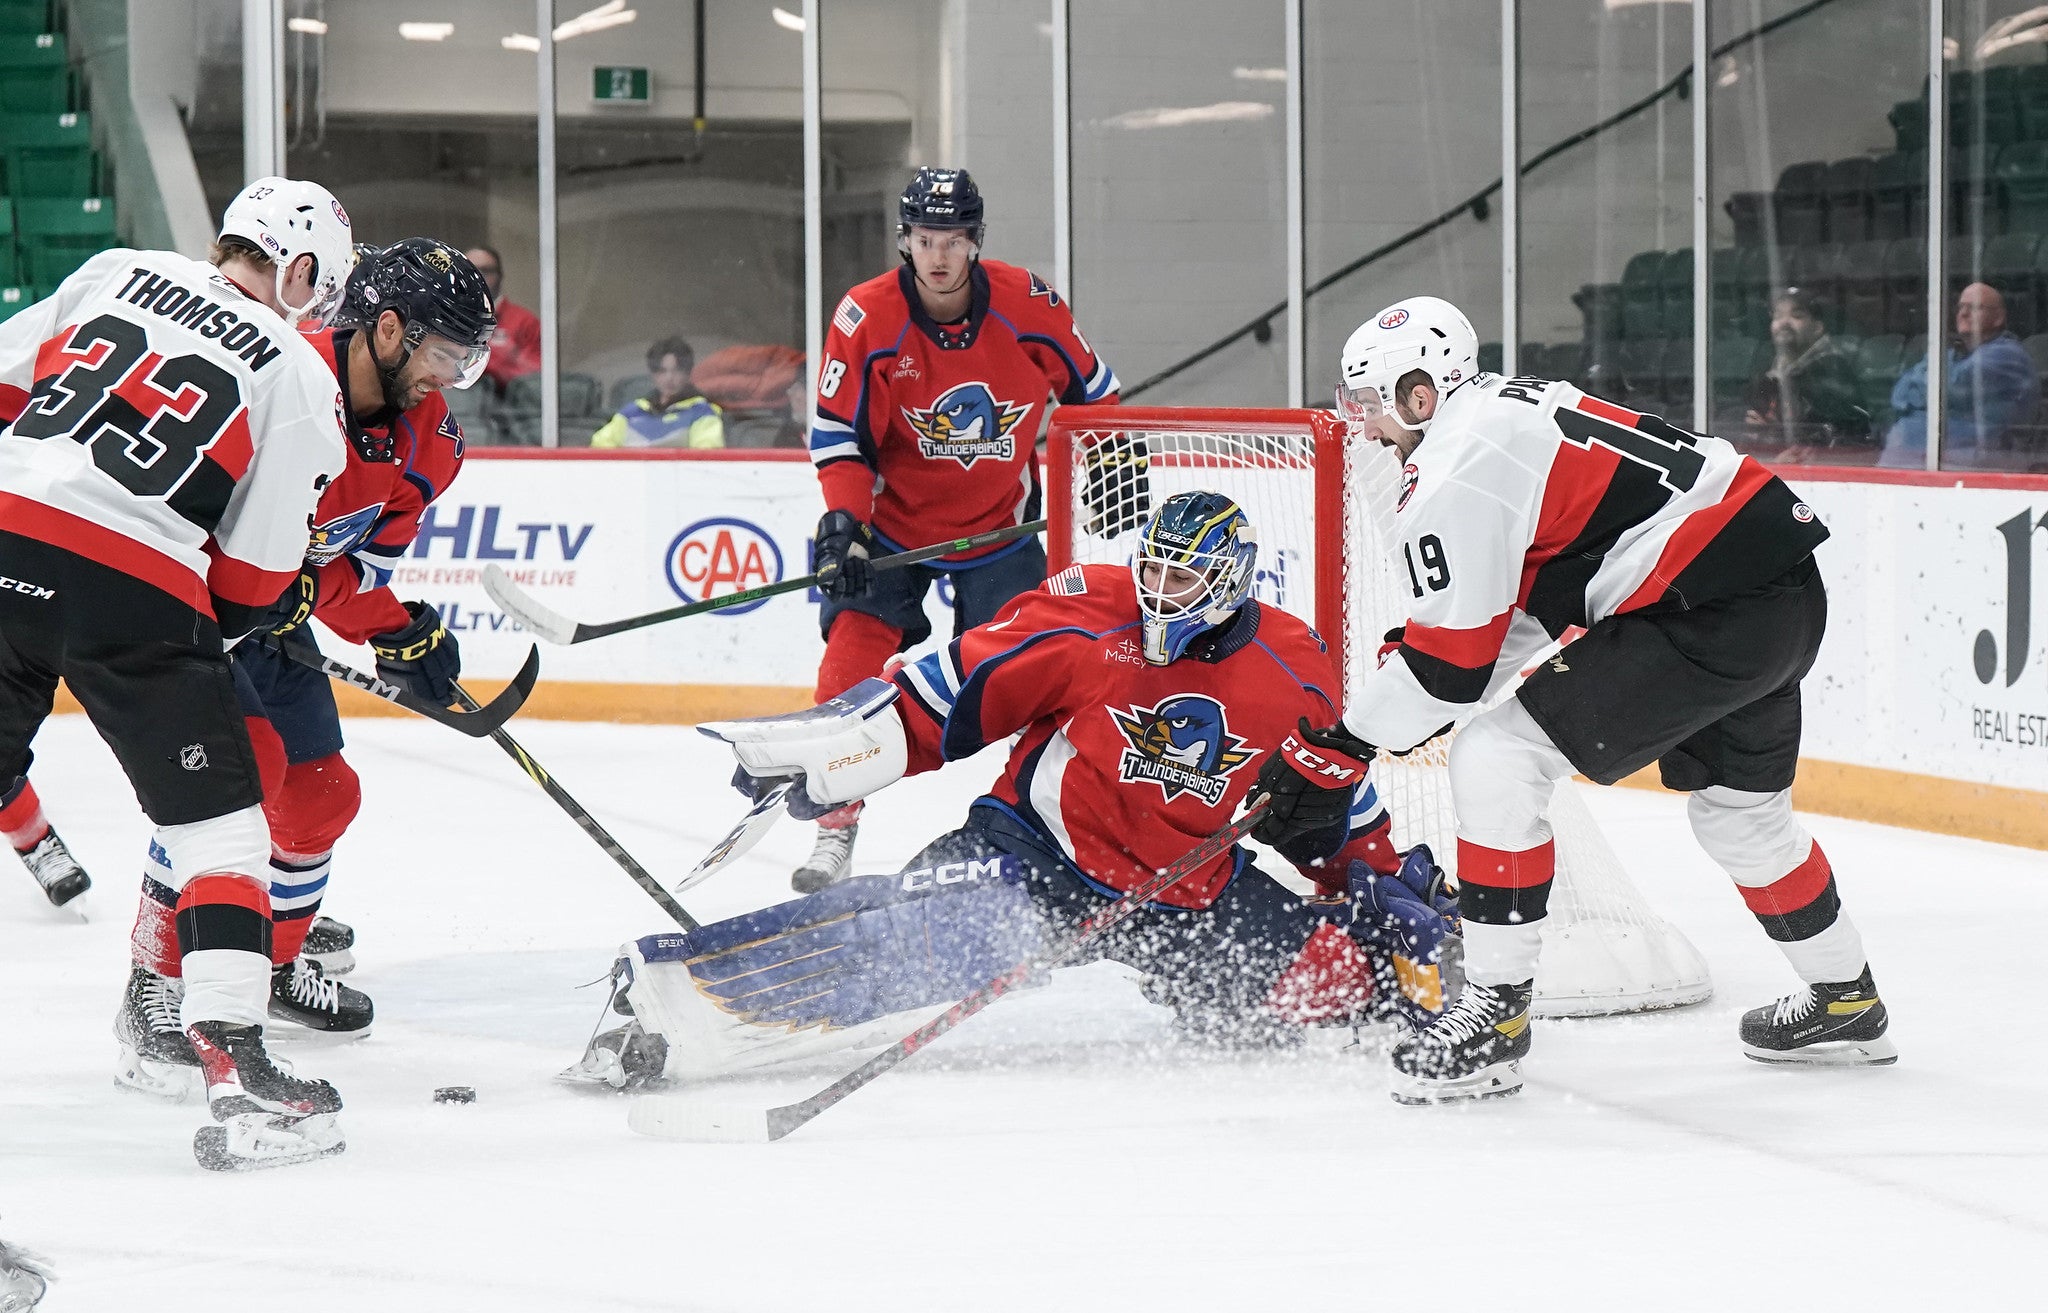 Springfield Thunderbirds took on the Grand Rapids Griffins